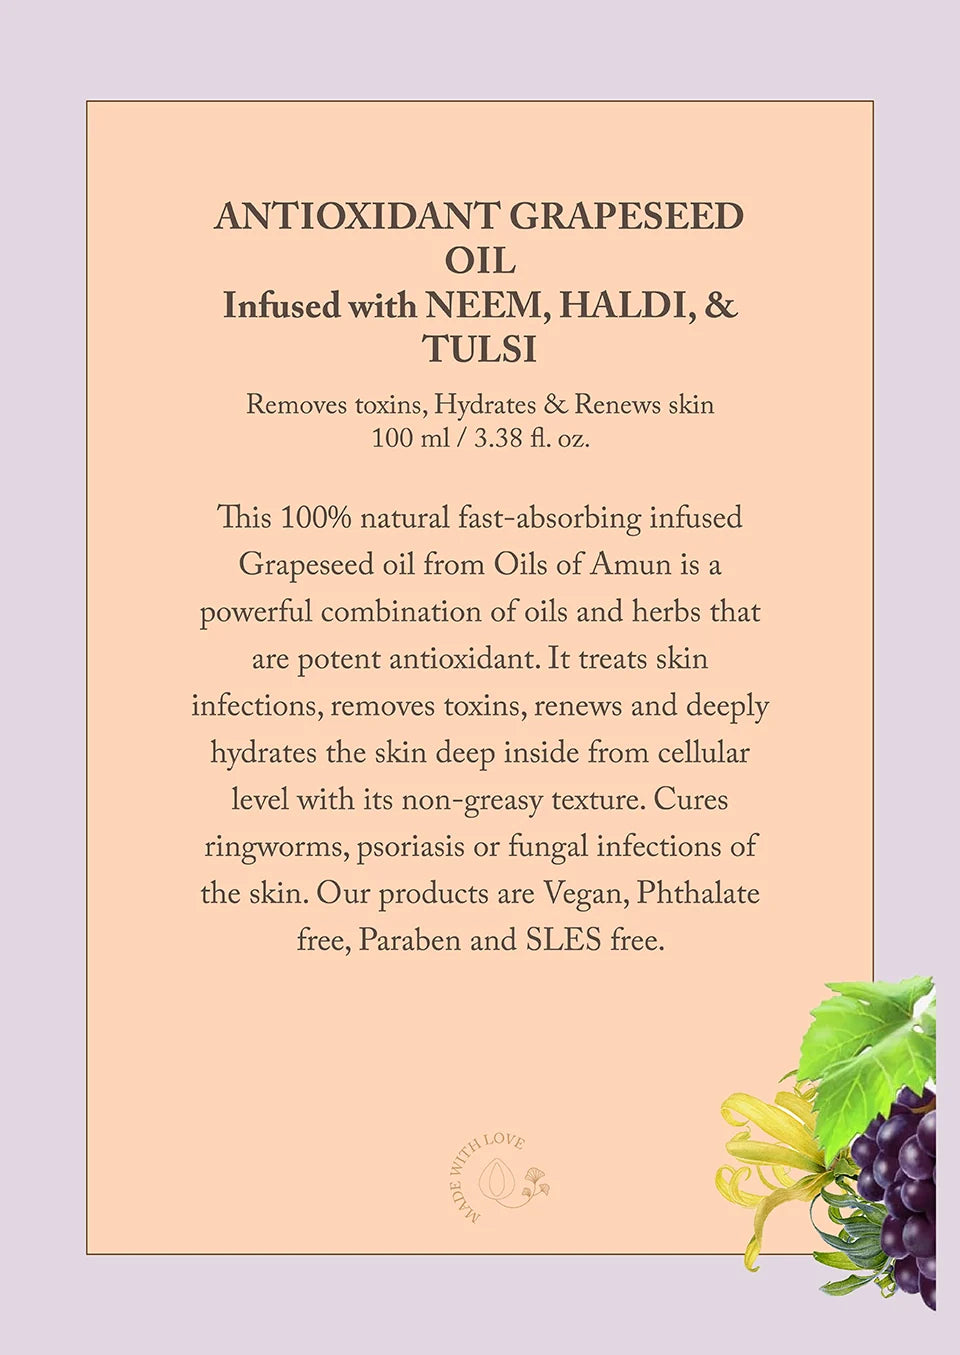 Grapeseed Oil Product Description